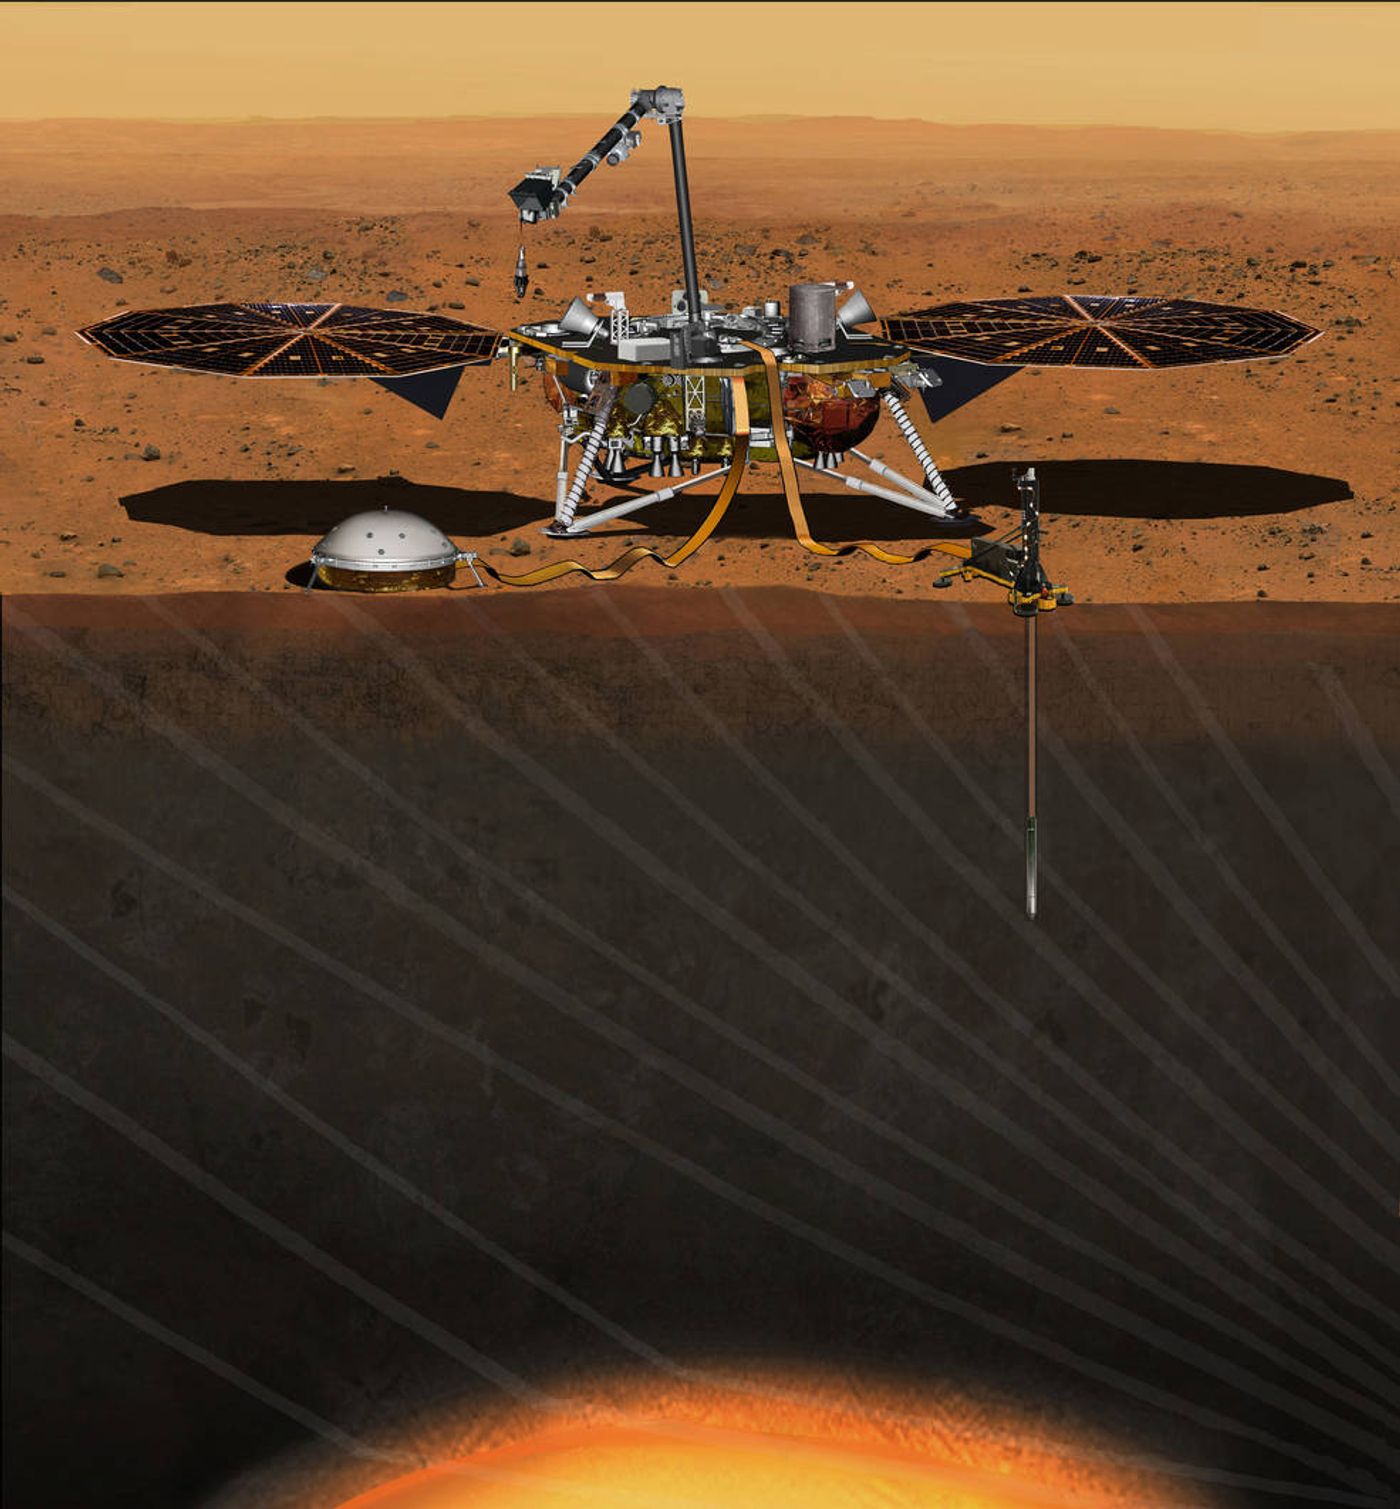 InSight will land on Mars' surface and dig 10 feet below to learn more about the red planet.